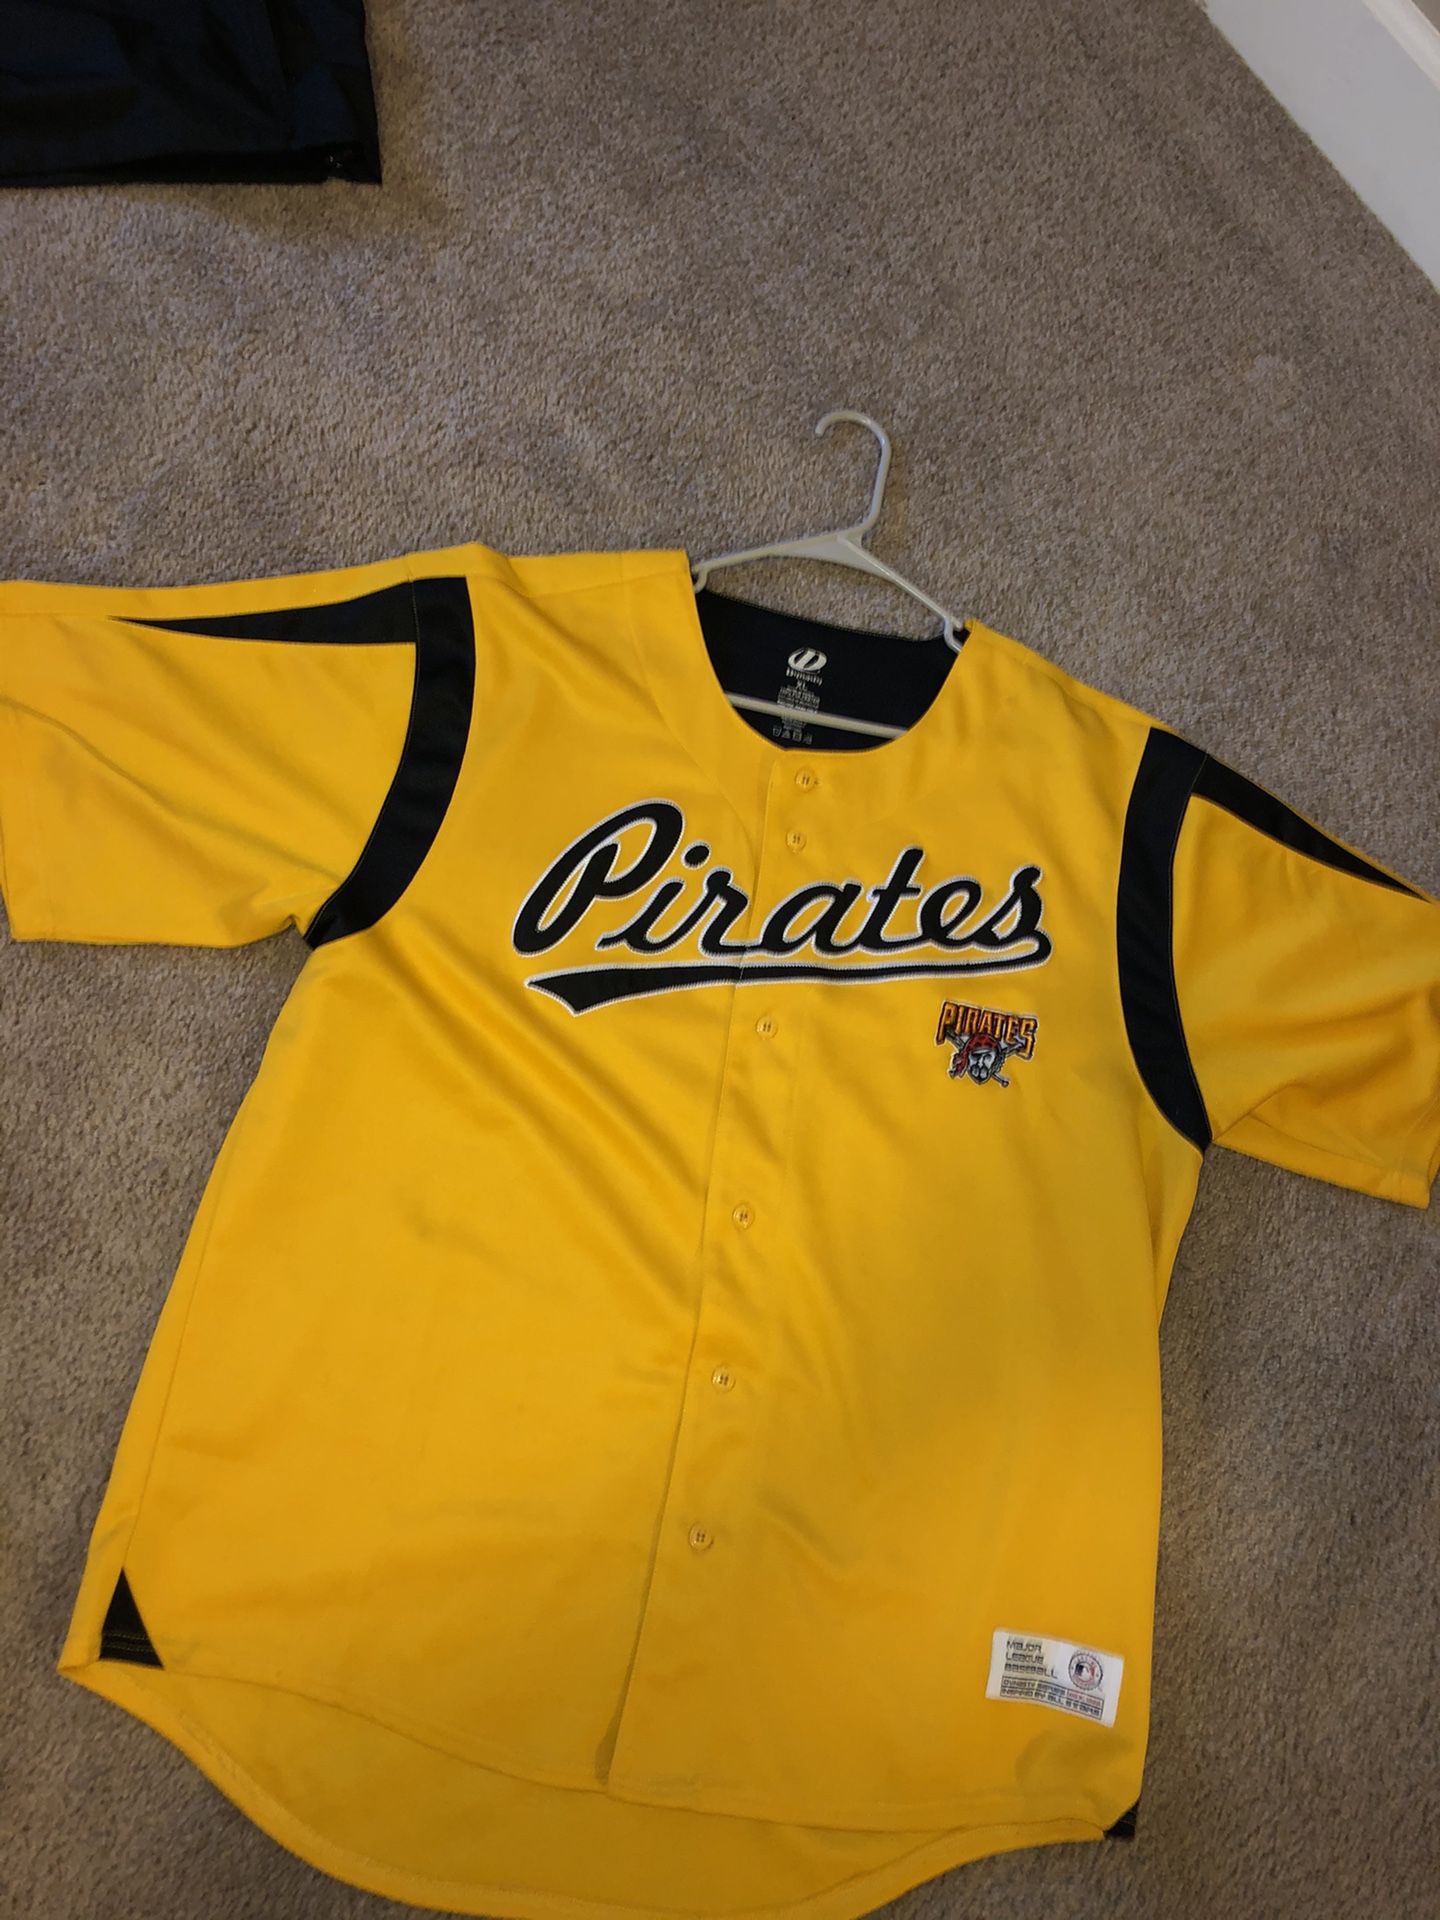 Pirates jersey for Sale in Mesa, AZ - OfferUp